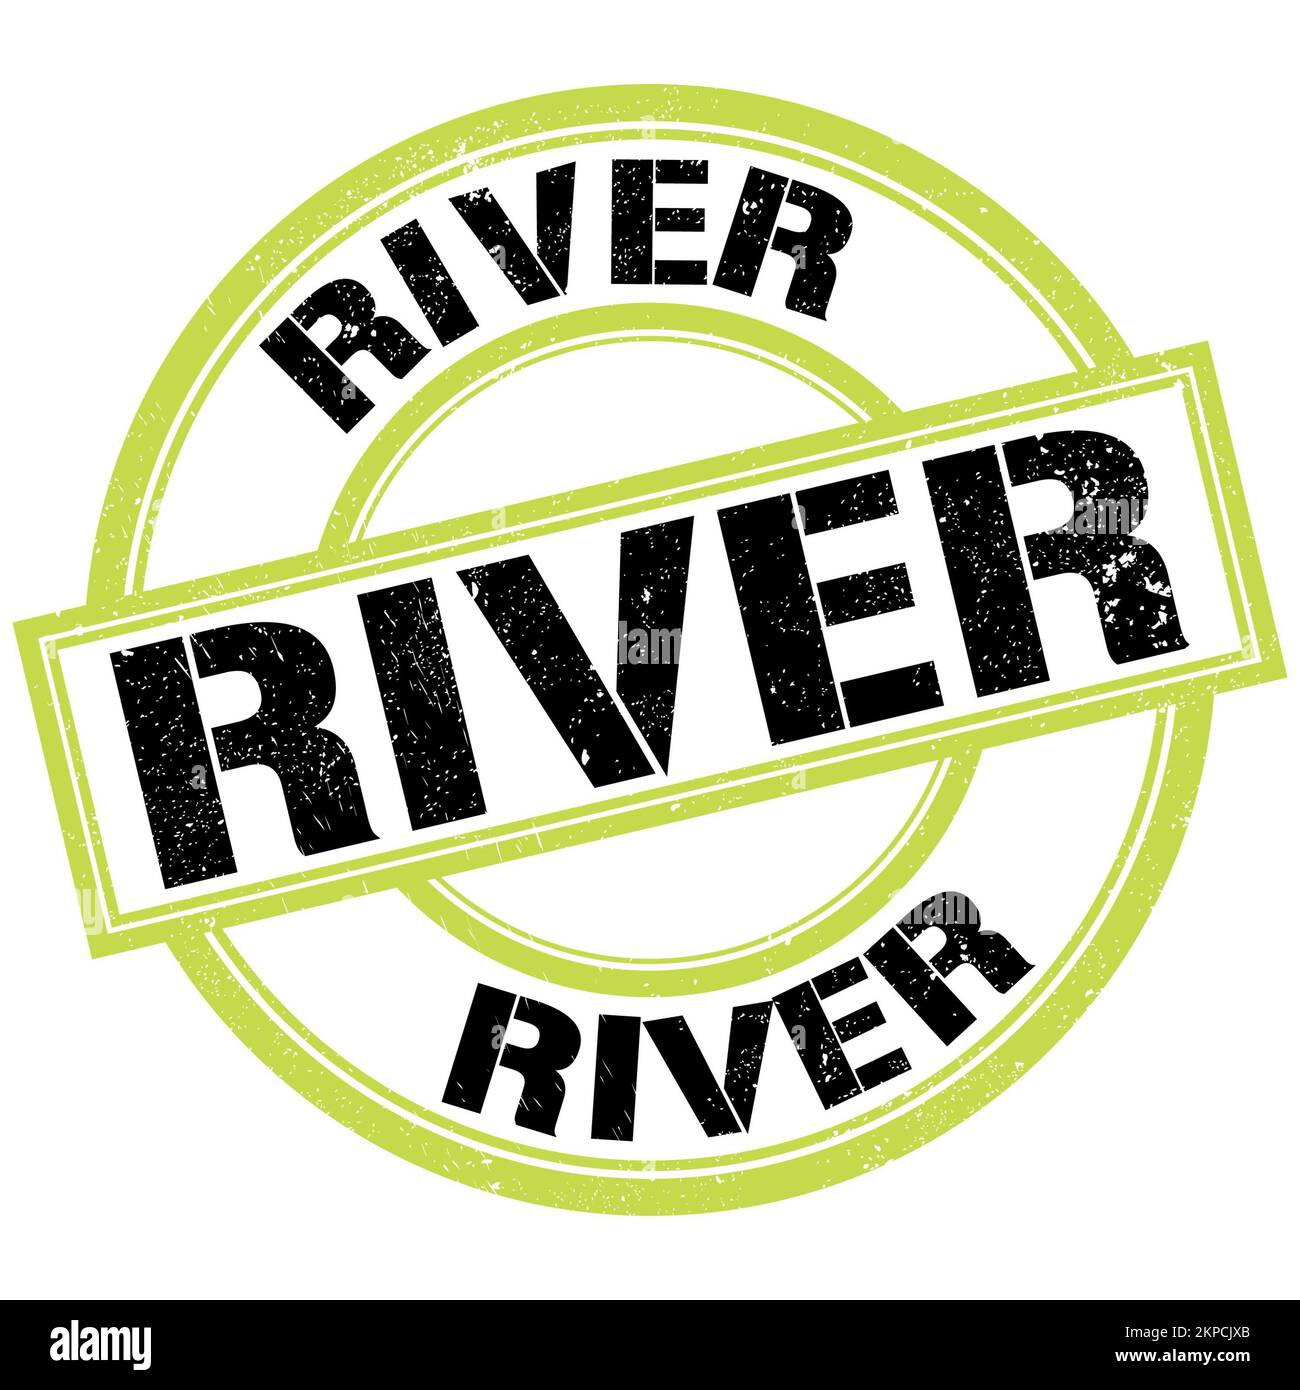 RIVER text written on green-black round stamp sign Stock Photo